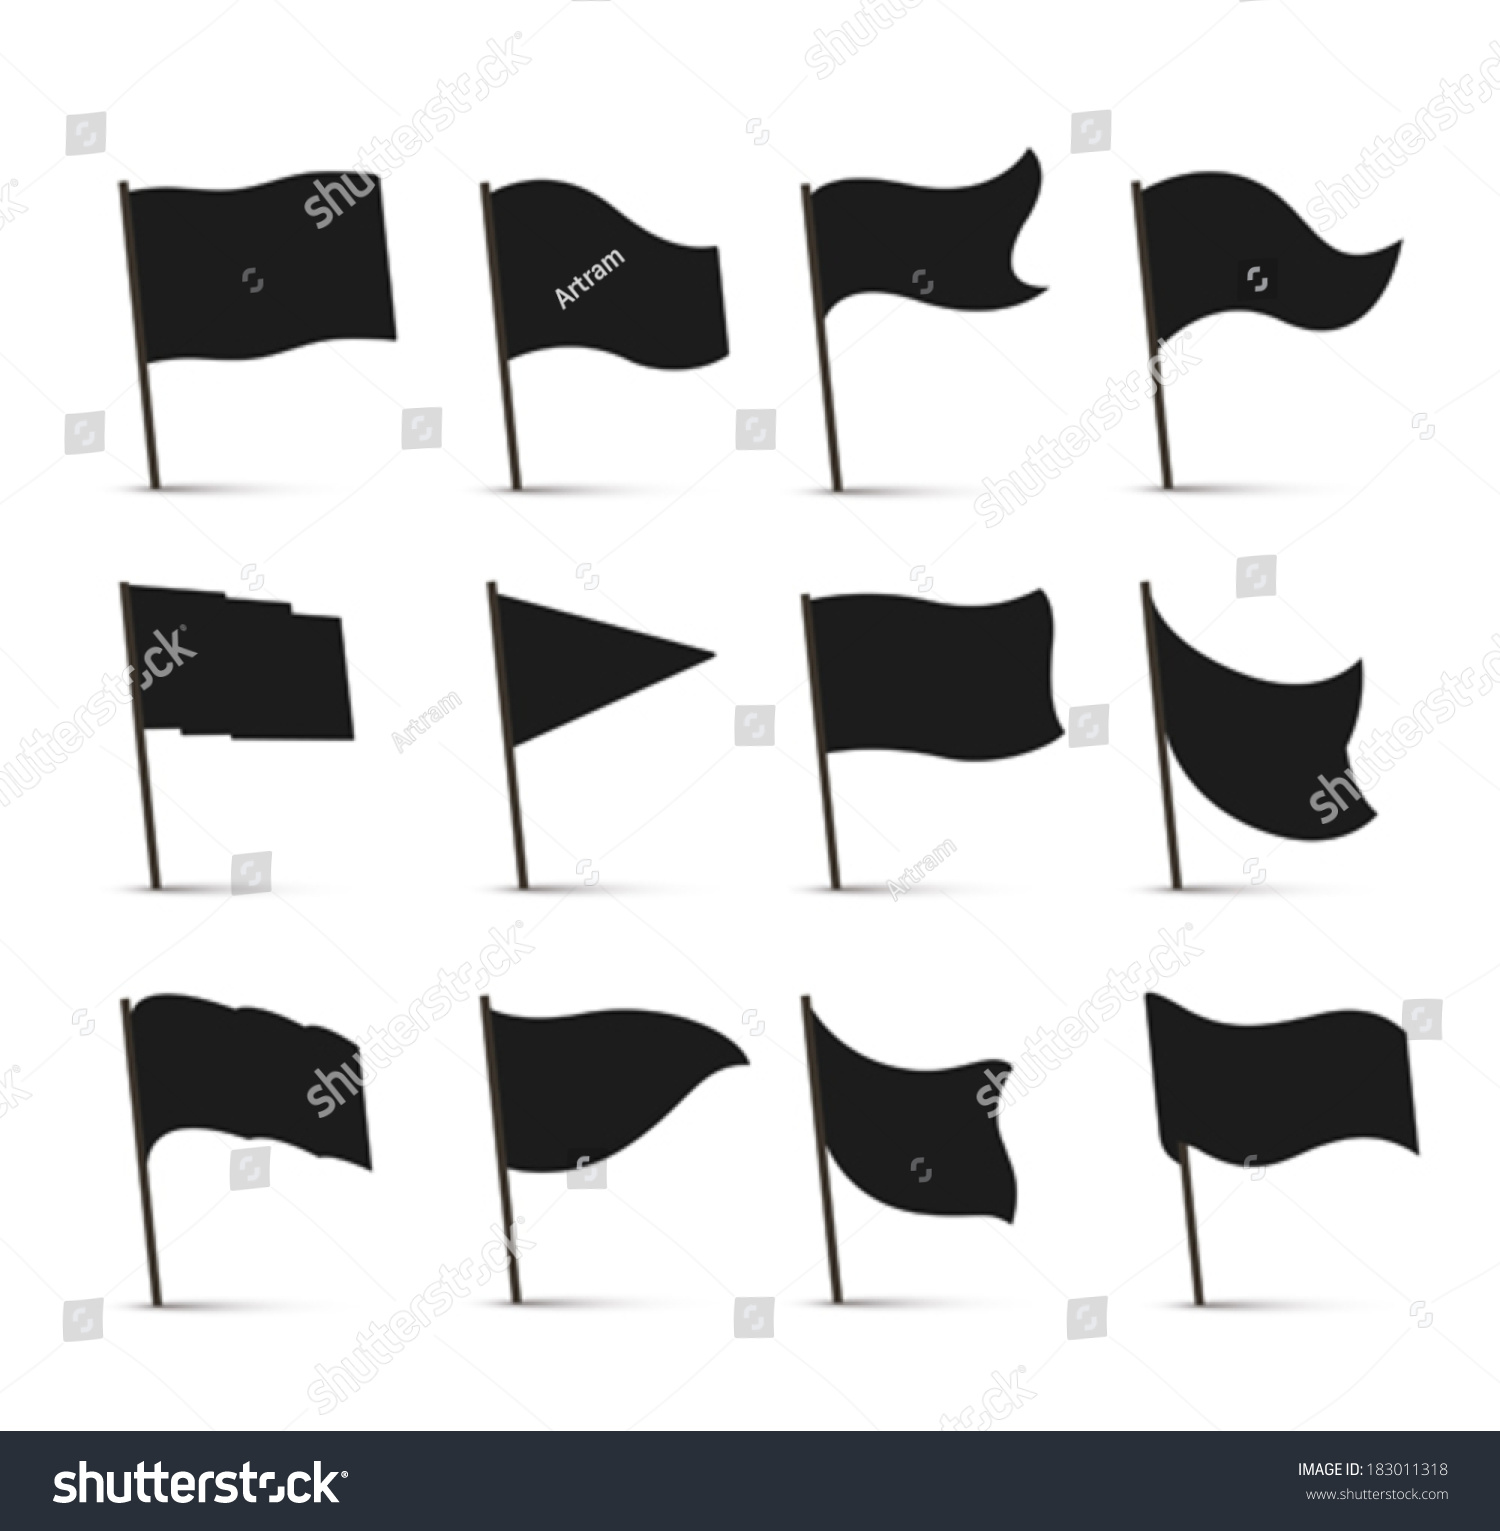 Black Flag Icons Stock Vector (Royalty Free) 183011318 - Shutterstock